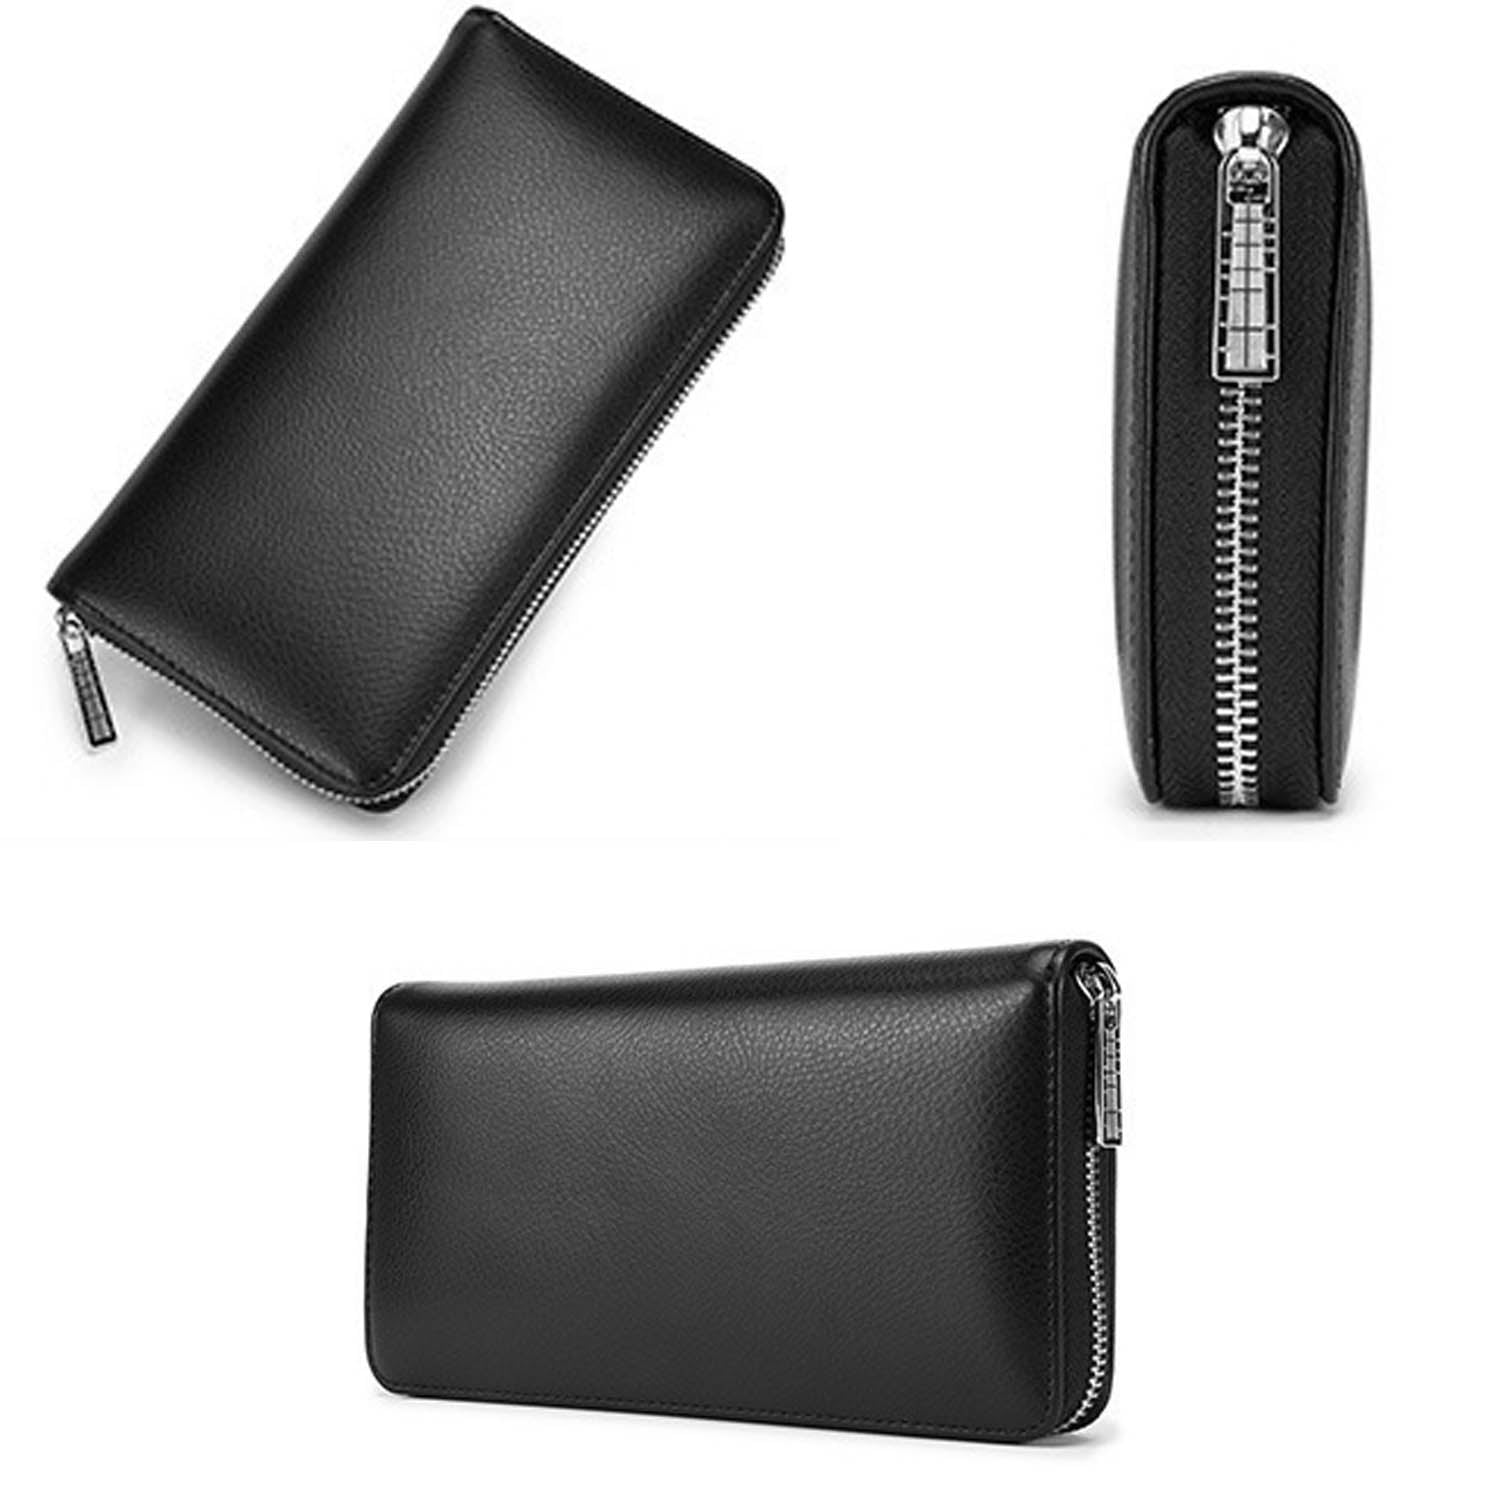  MARYAM Luxury Designer Genuine Leather RFID wallets for women,  The best black credit card holder for women, the most beautiful wristlet  keychain wallet women, THE women wallet you are looking for! 